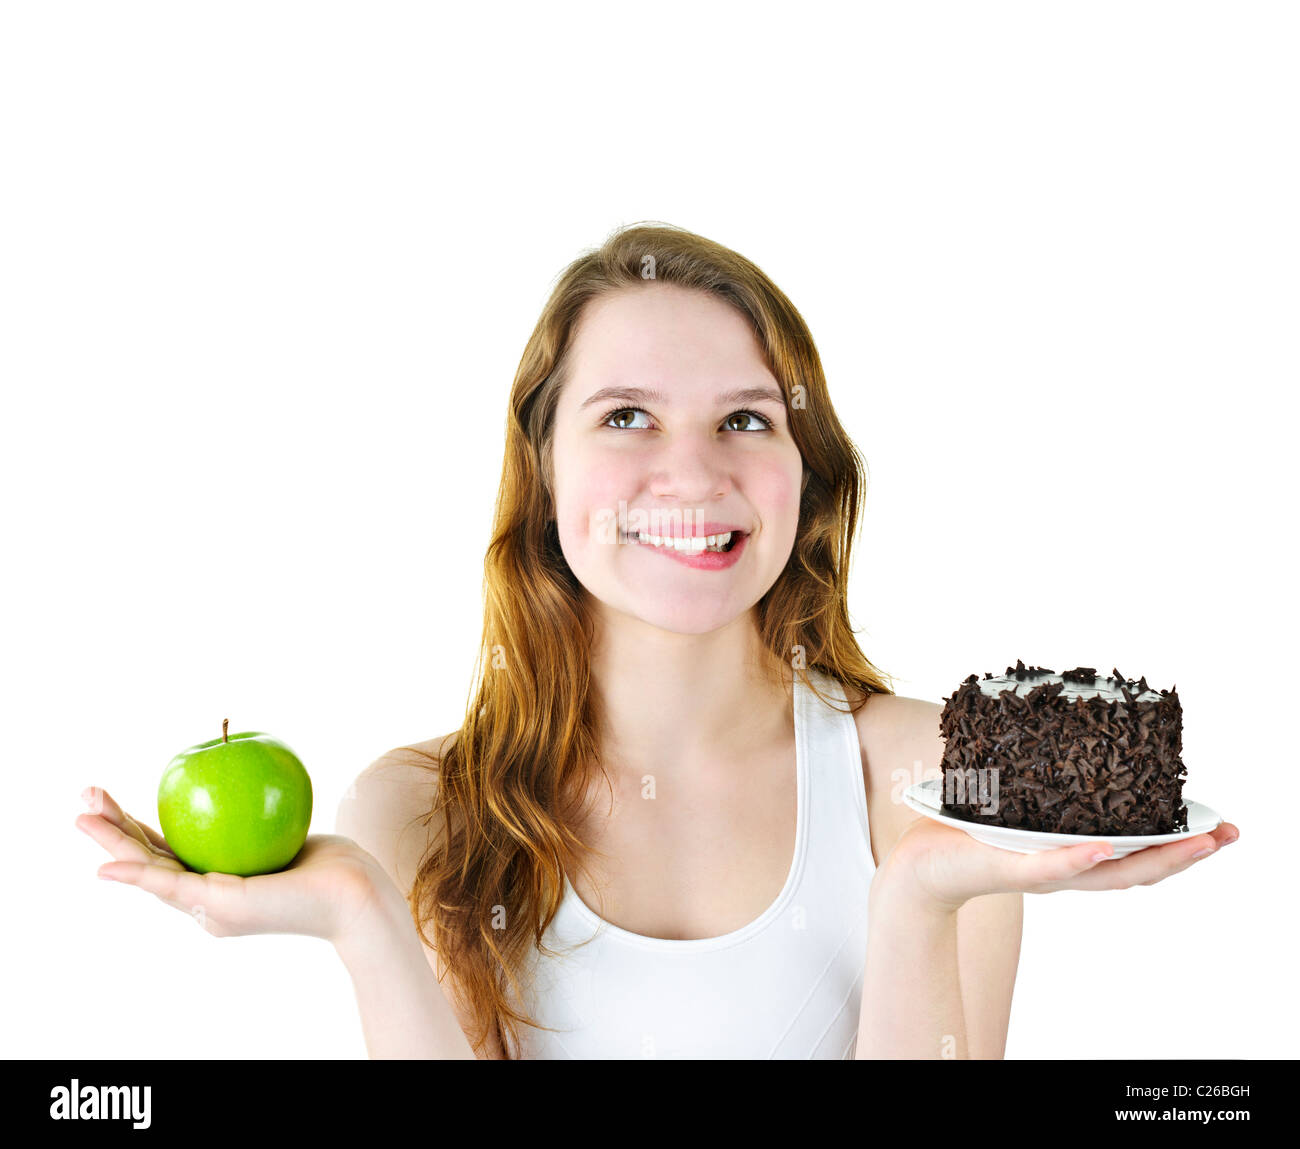 Tempted young woman holding apple and chocolate cake making a choice Stock Photo